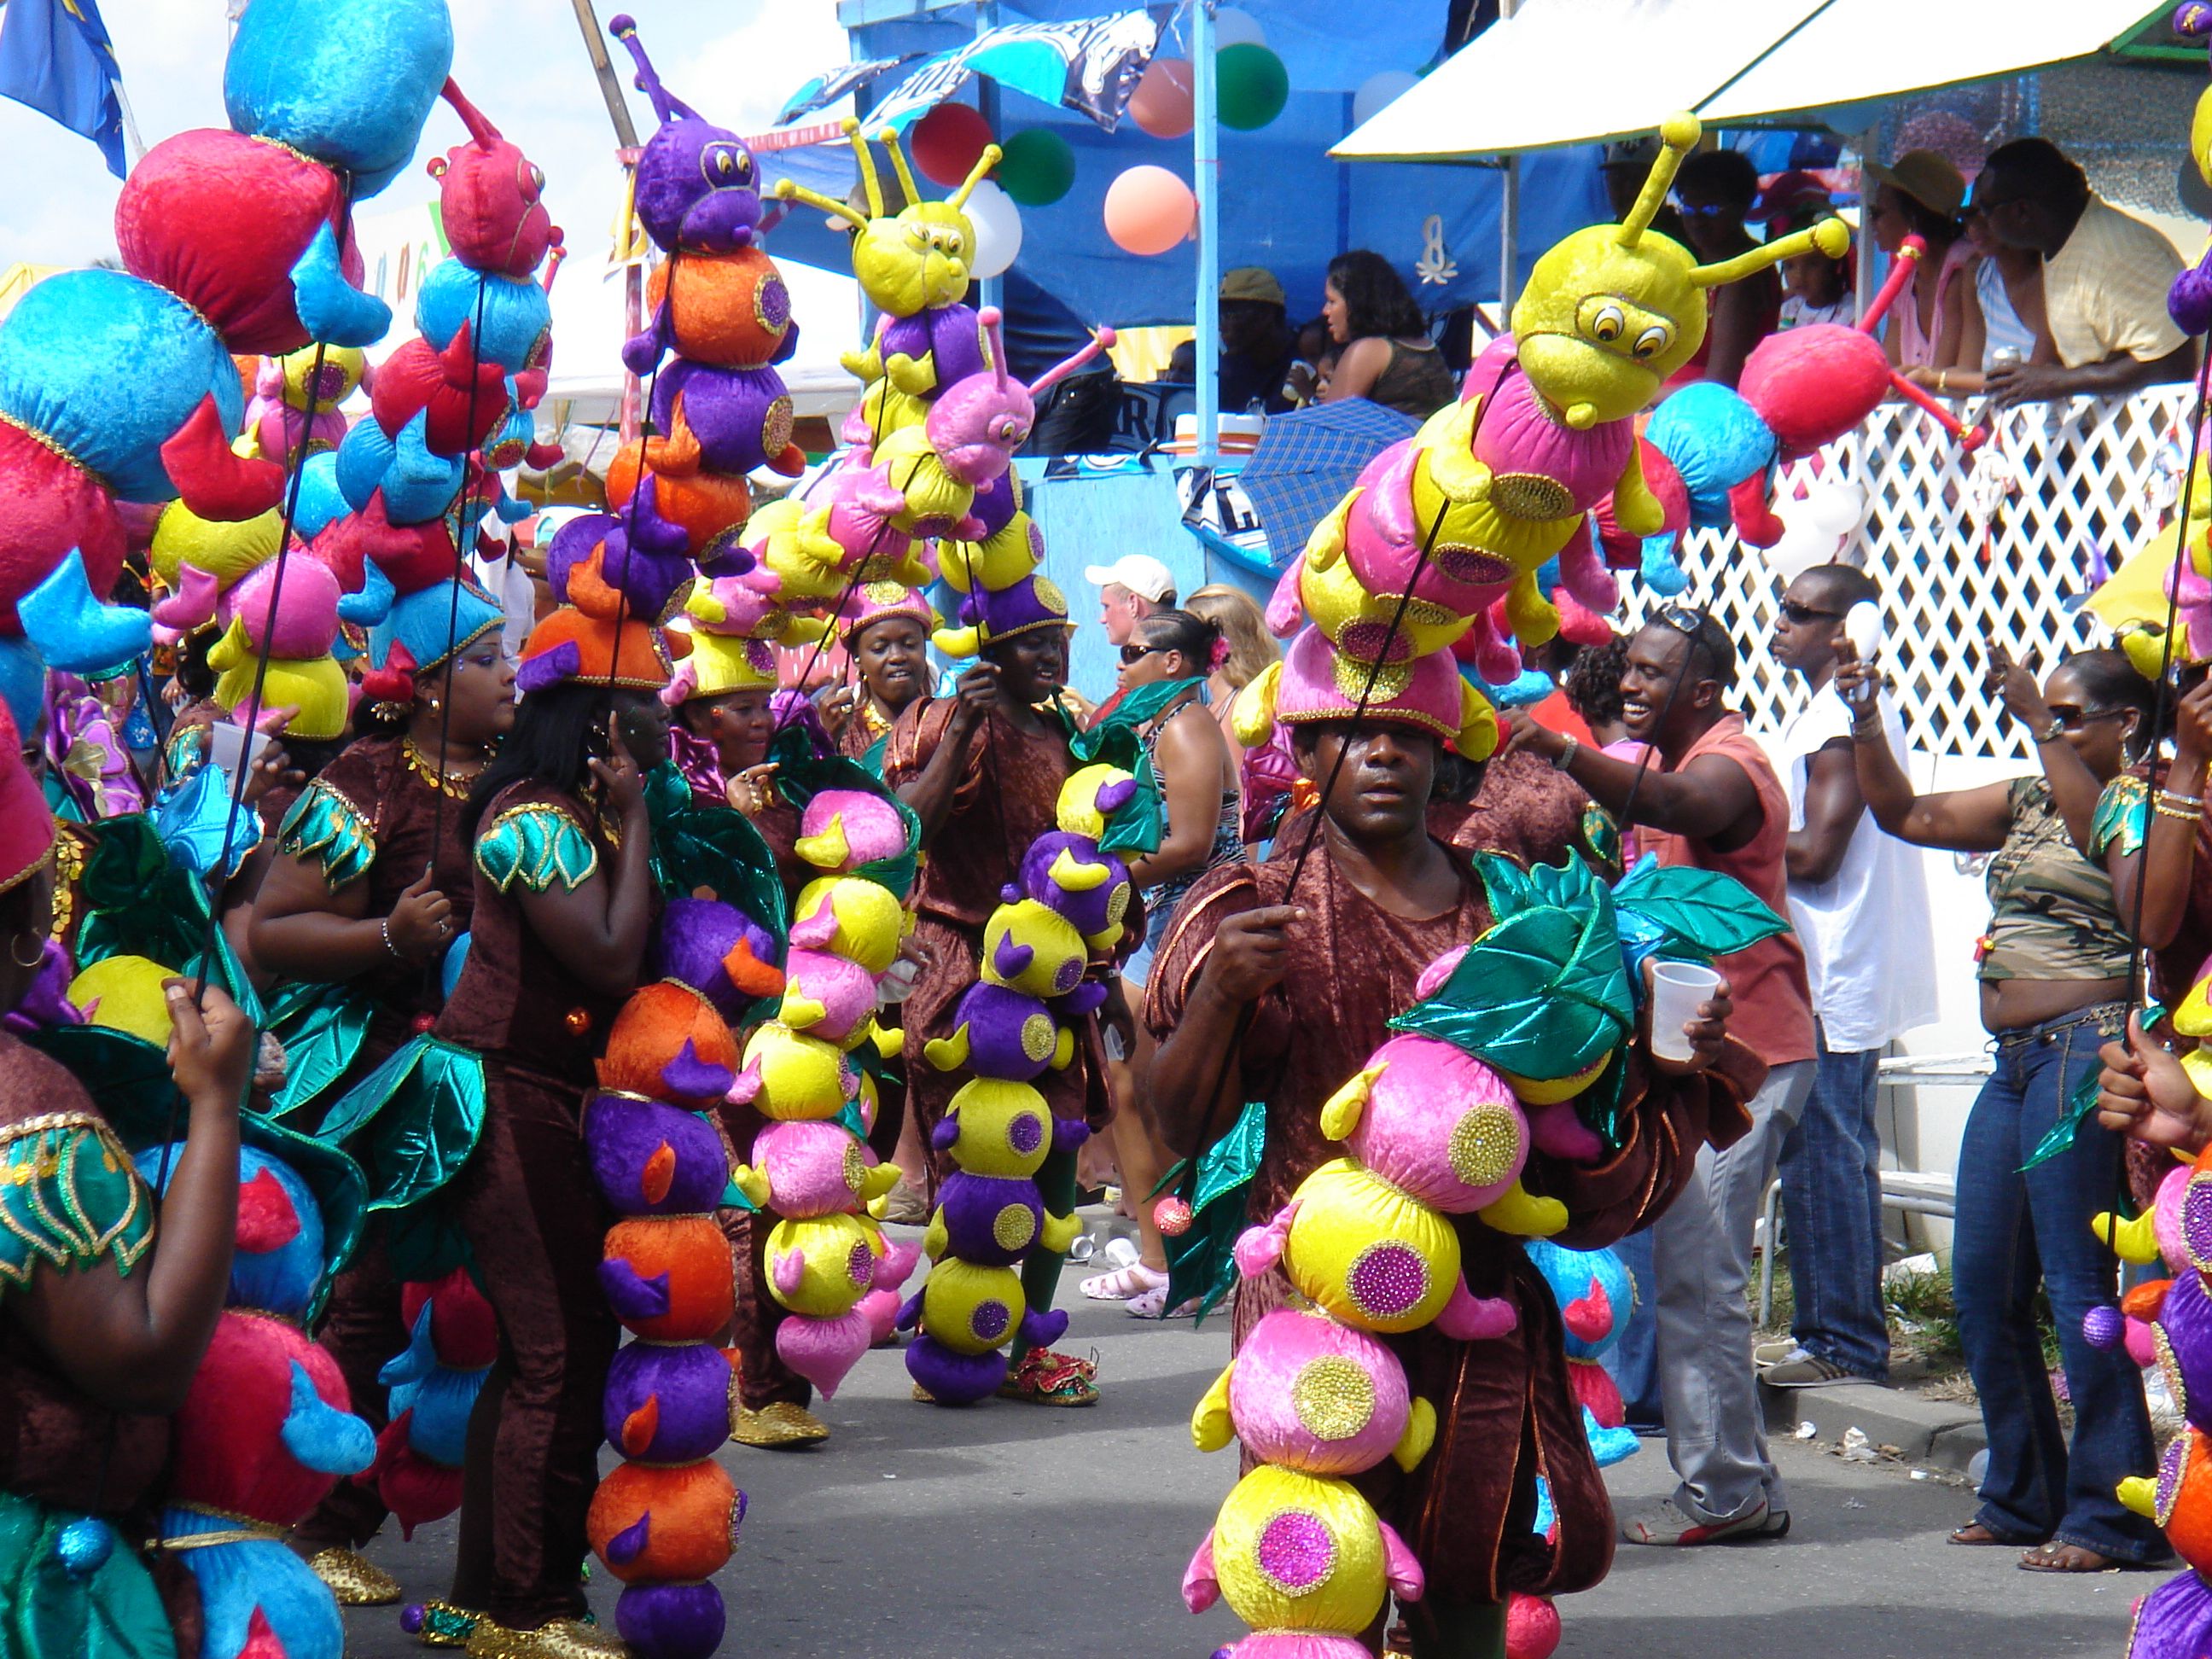 My favorite costumes from the parade. | Curacao | Pinterest | Carnival